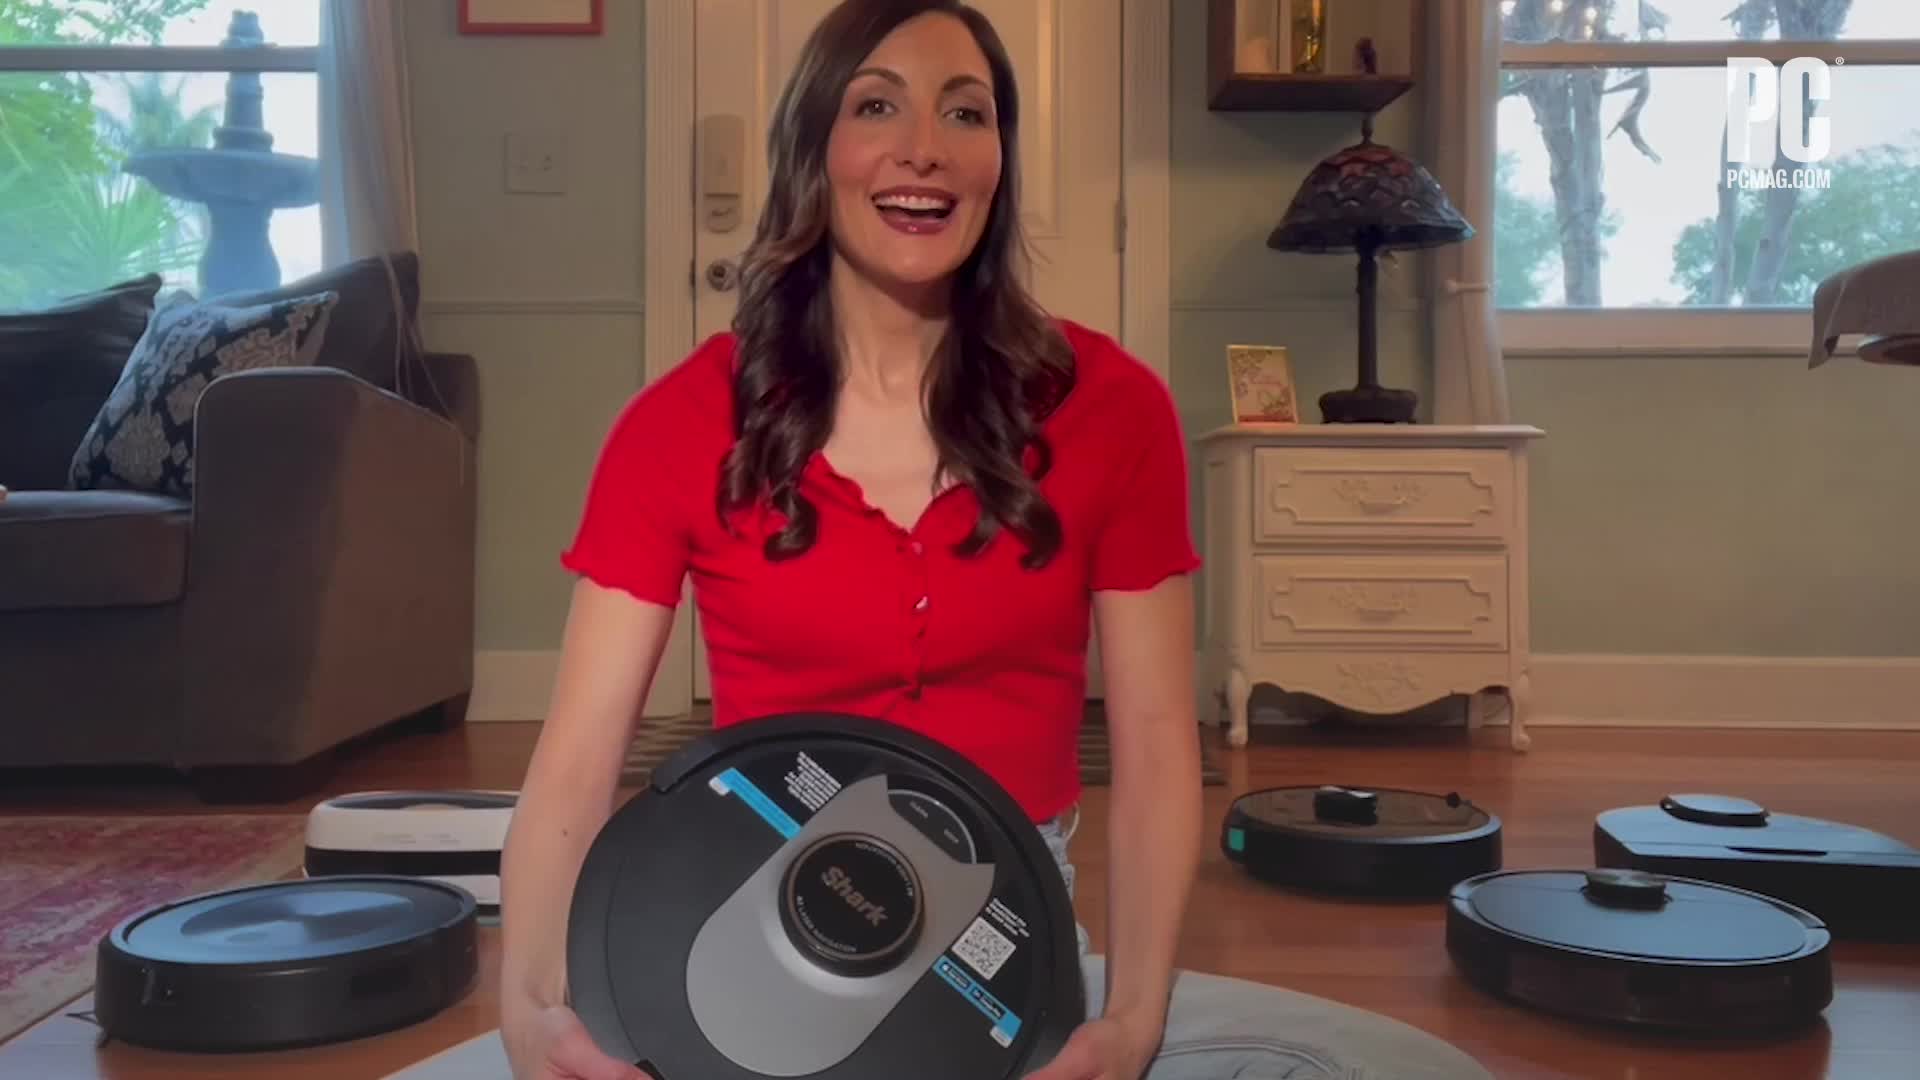 The Best Robot Vacuums for 2022